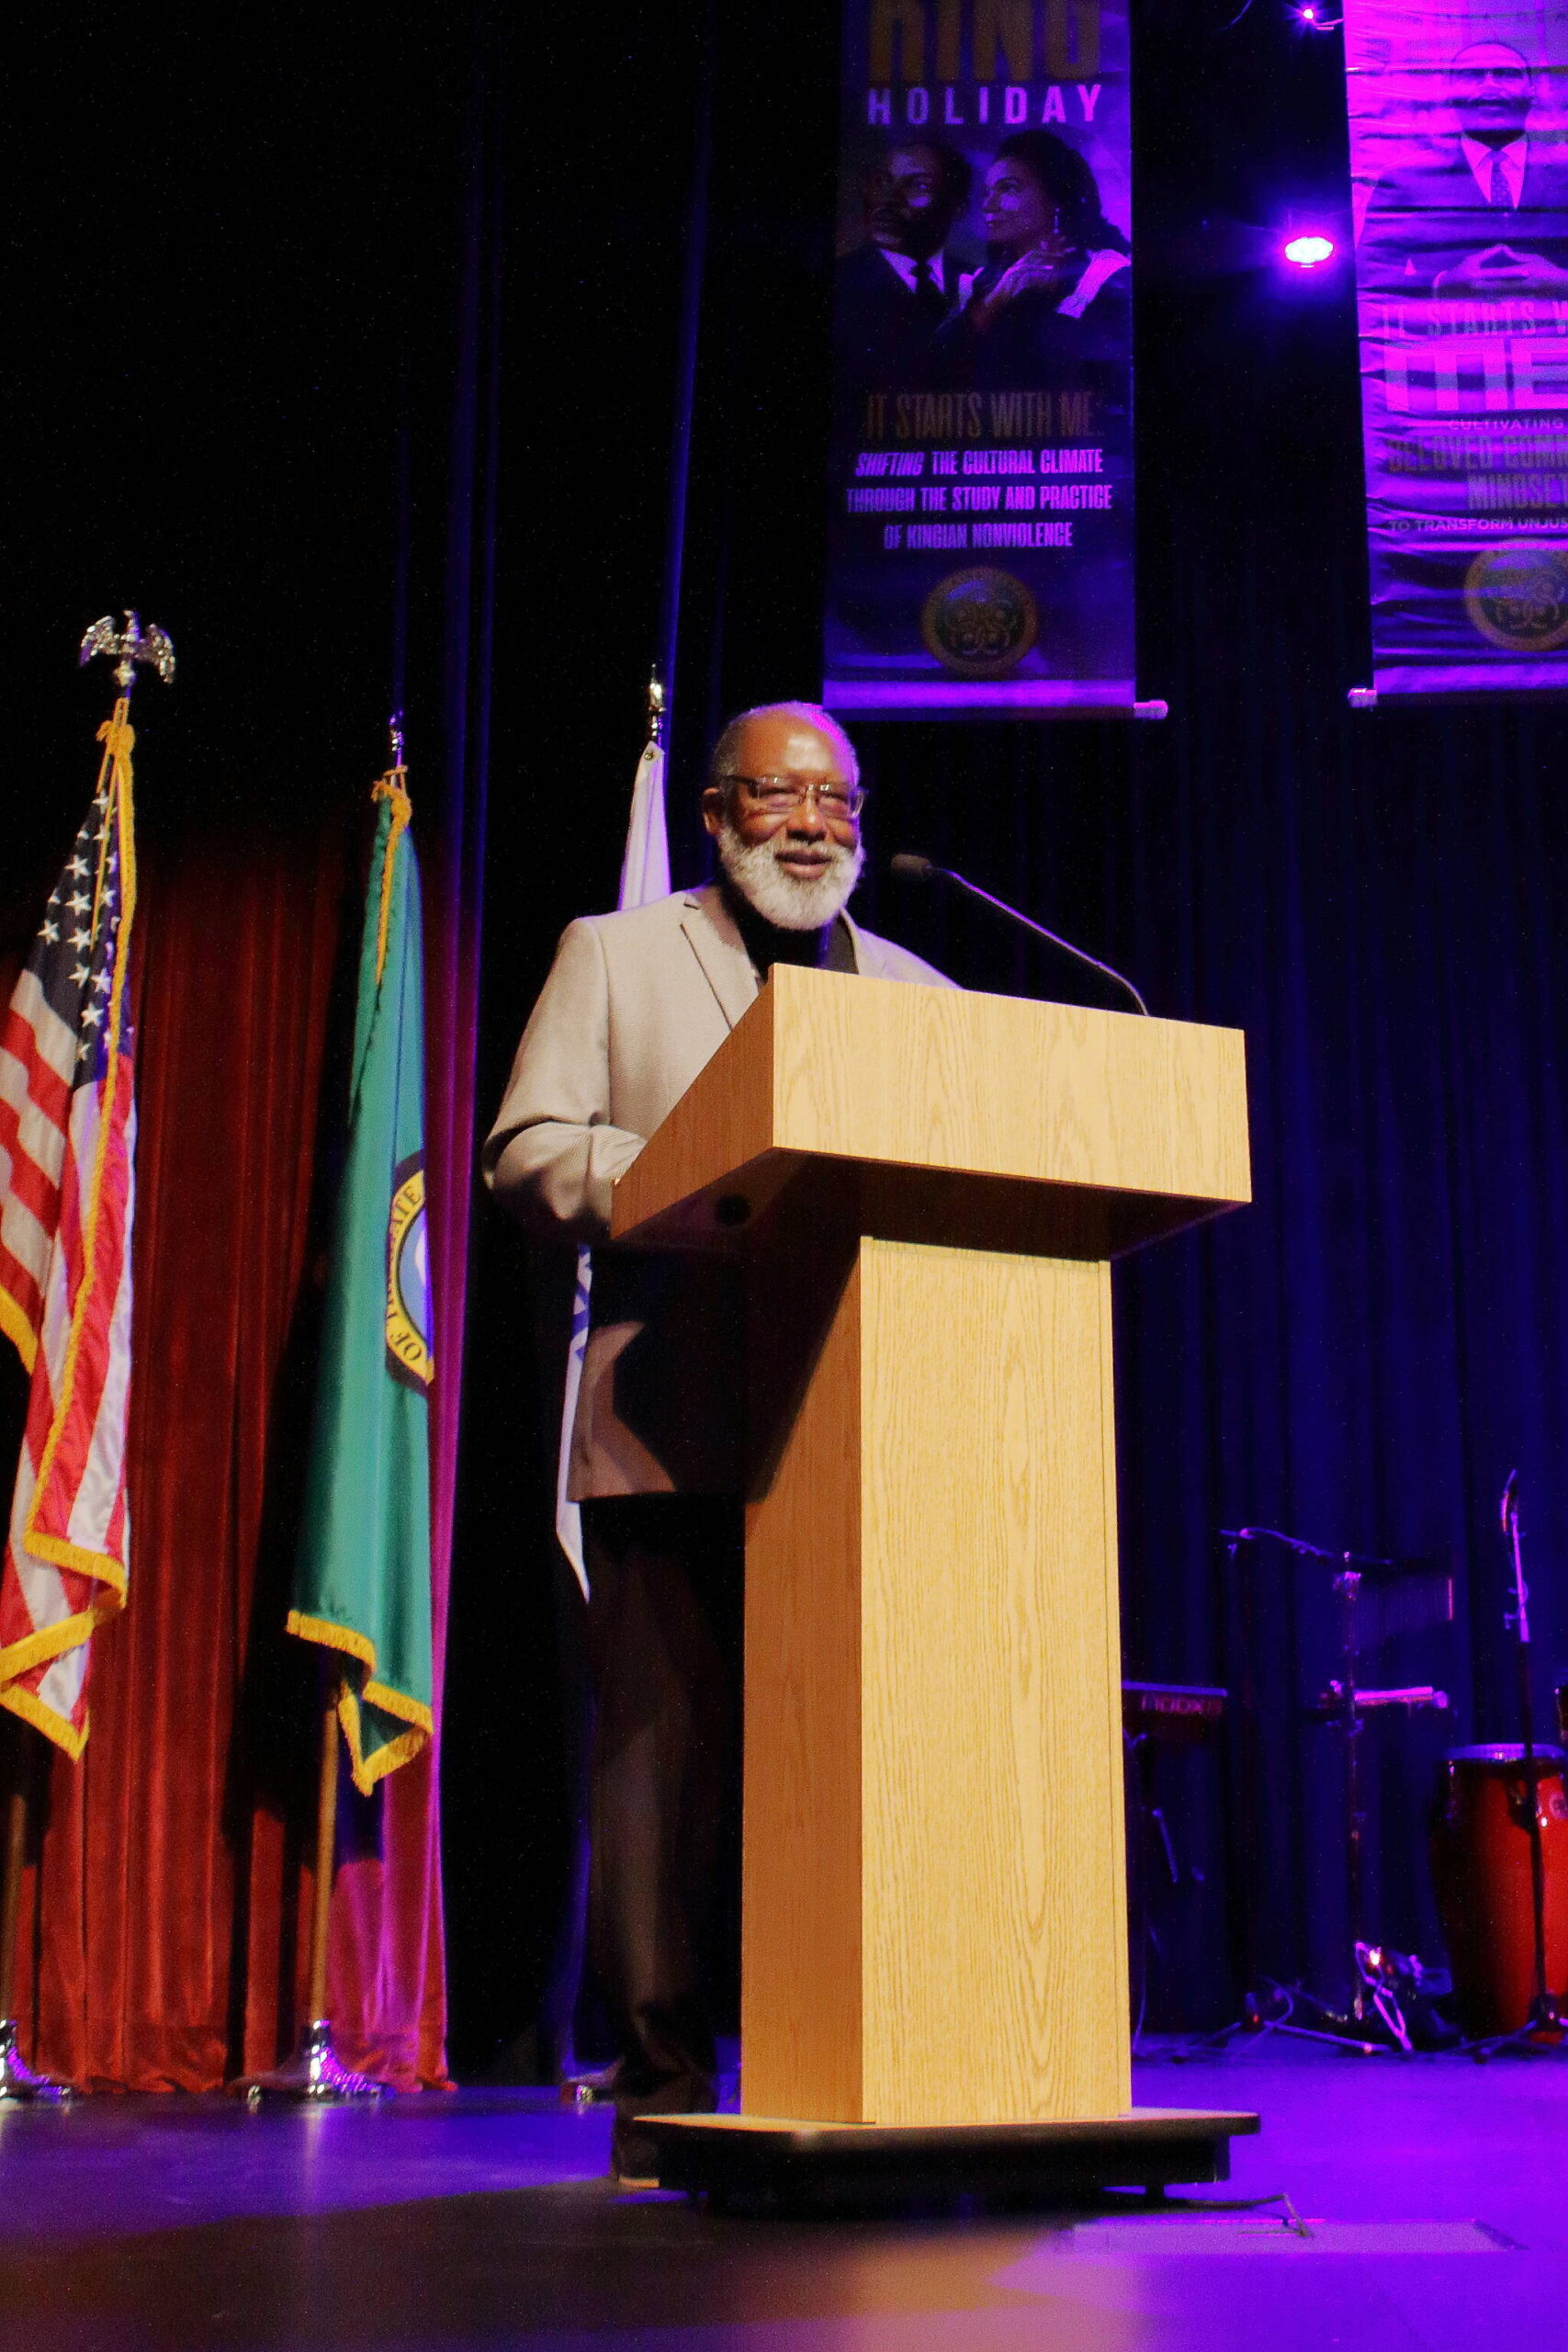 Photo by Keelin Everly-Lang/The Mirror
Diversity Commissioner Ron Walker speaks during the MLK Day Celebration.